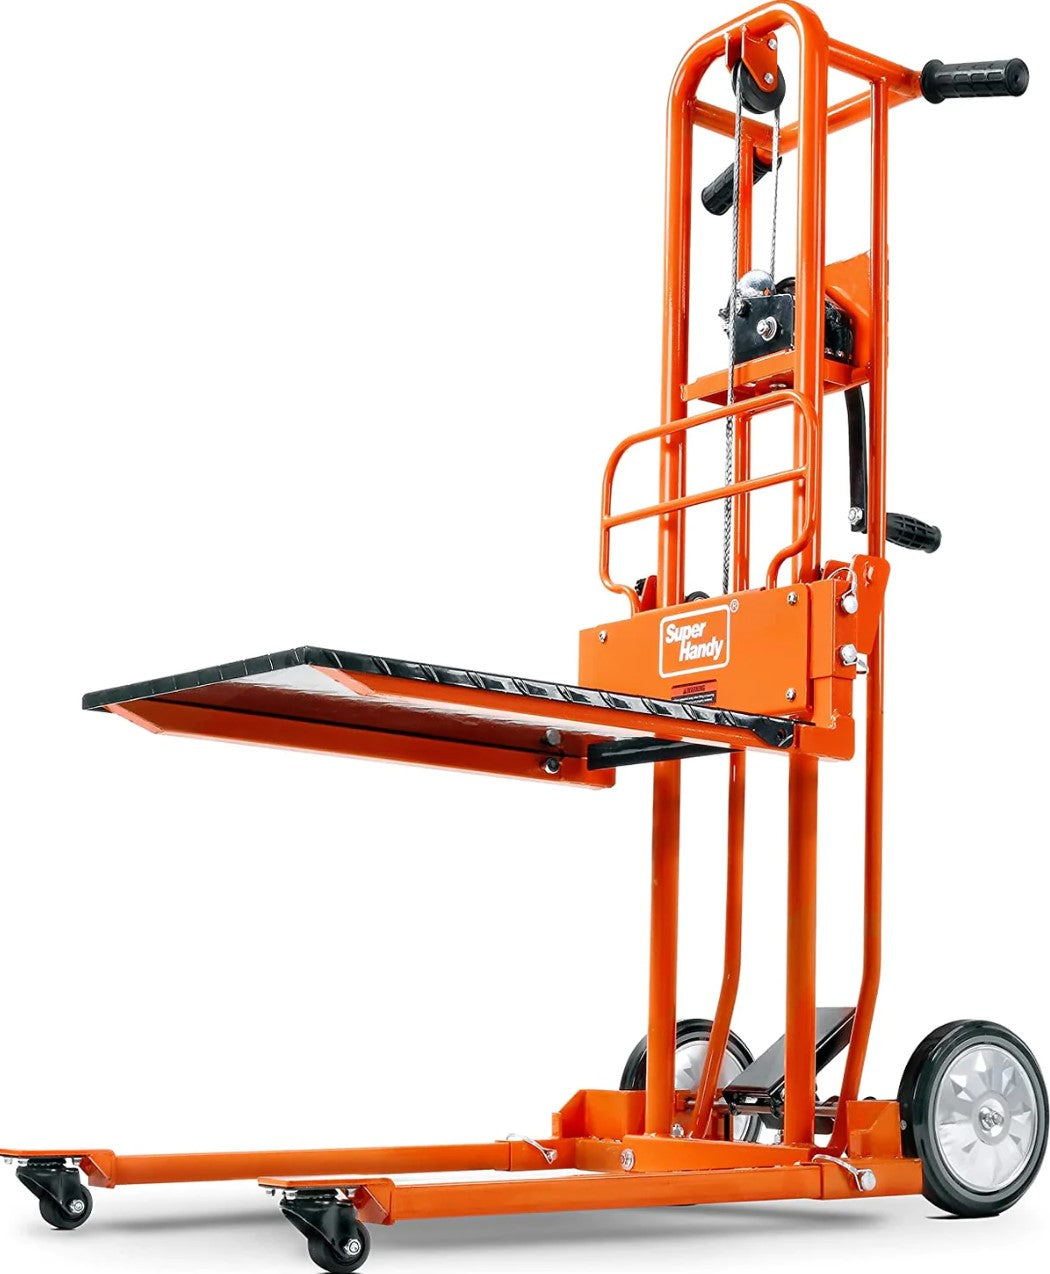 Super Handy, Super Handy Manual Stacker 330 lbs 40" Max Lift with a Flat Bed New